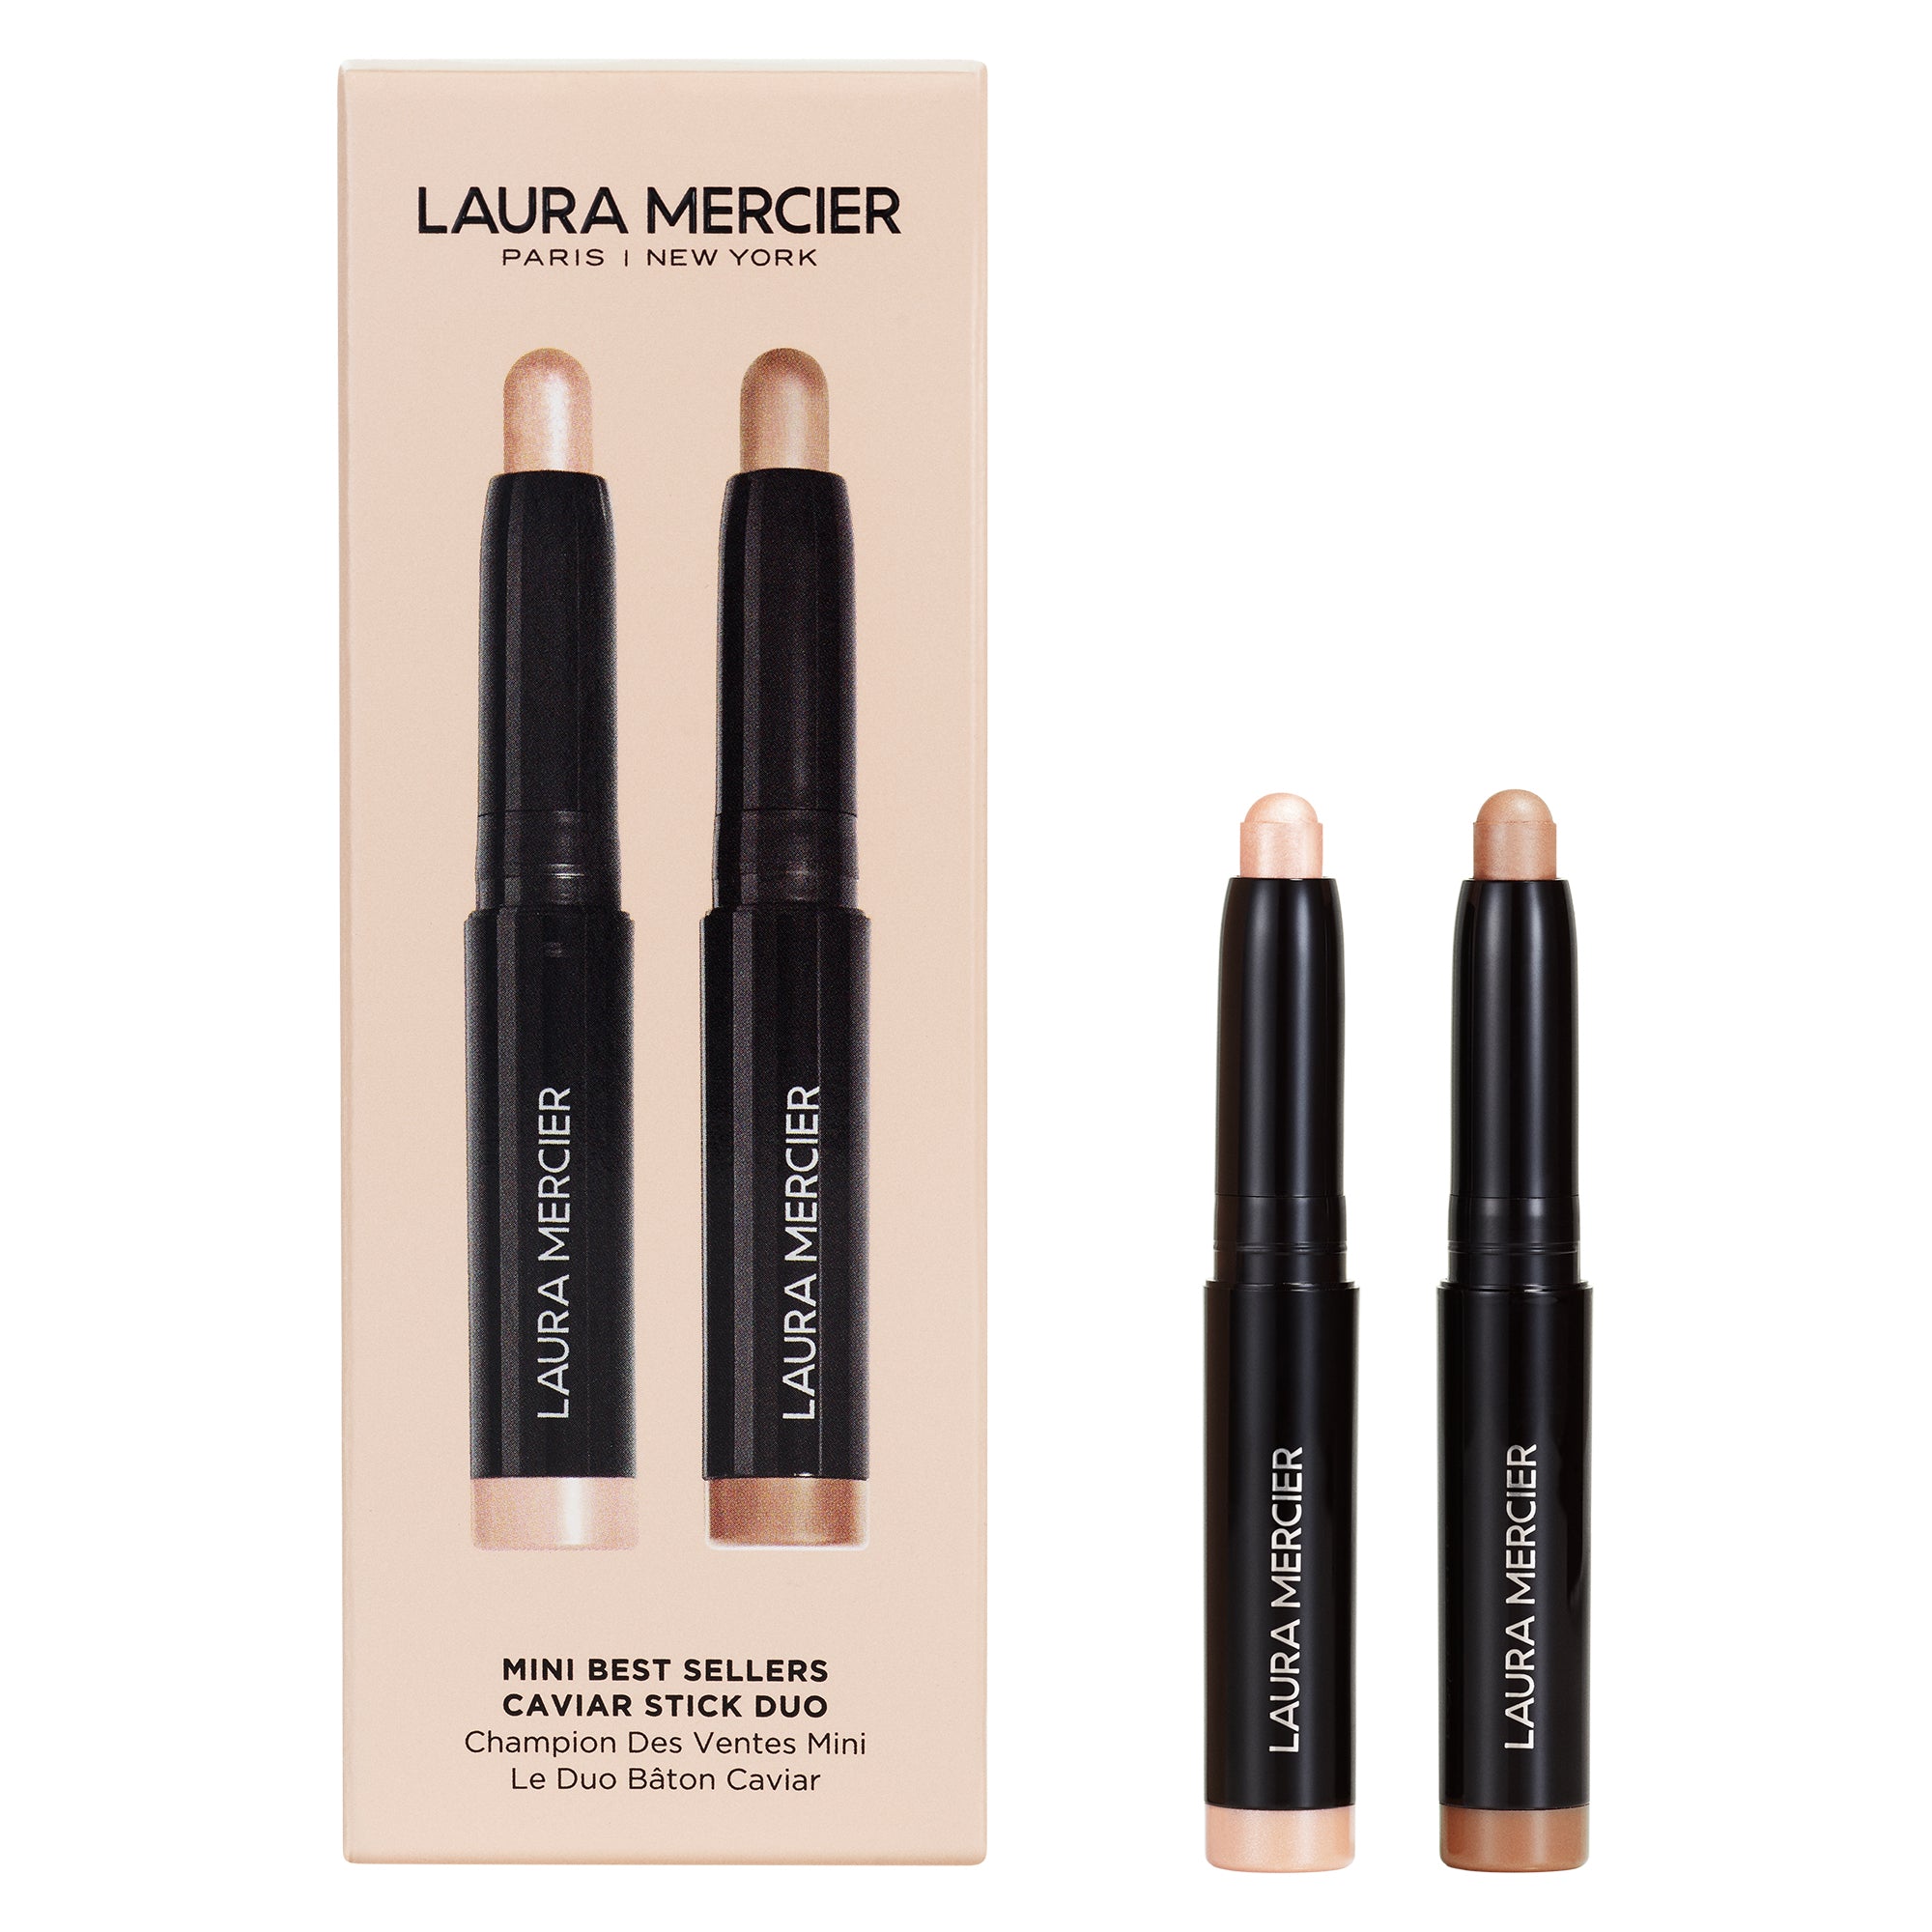 Mini Best Sellers Caviar Stick Eye Color Duo View 1